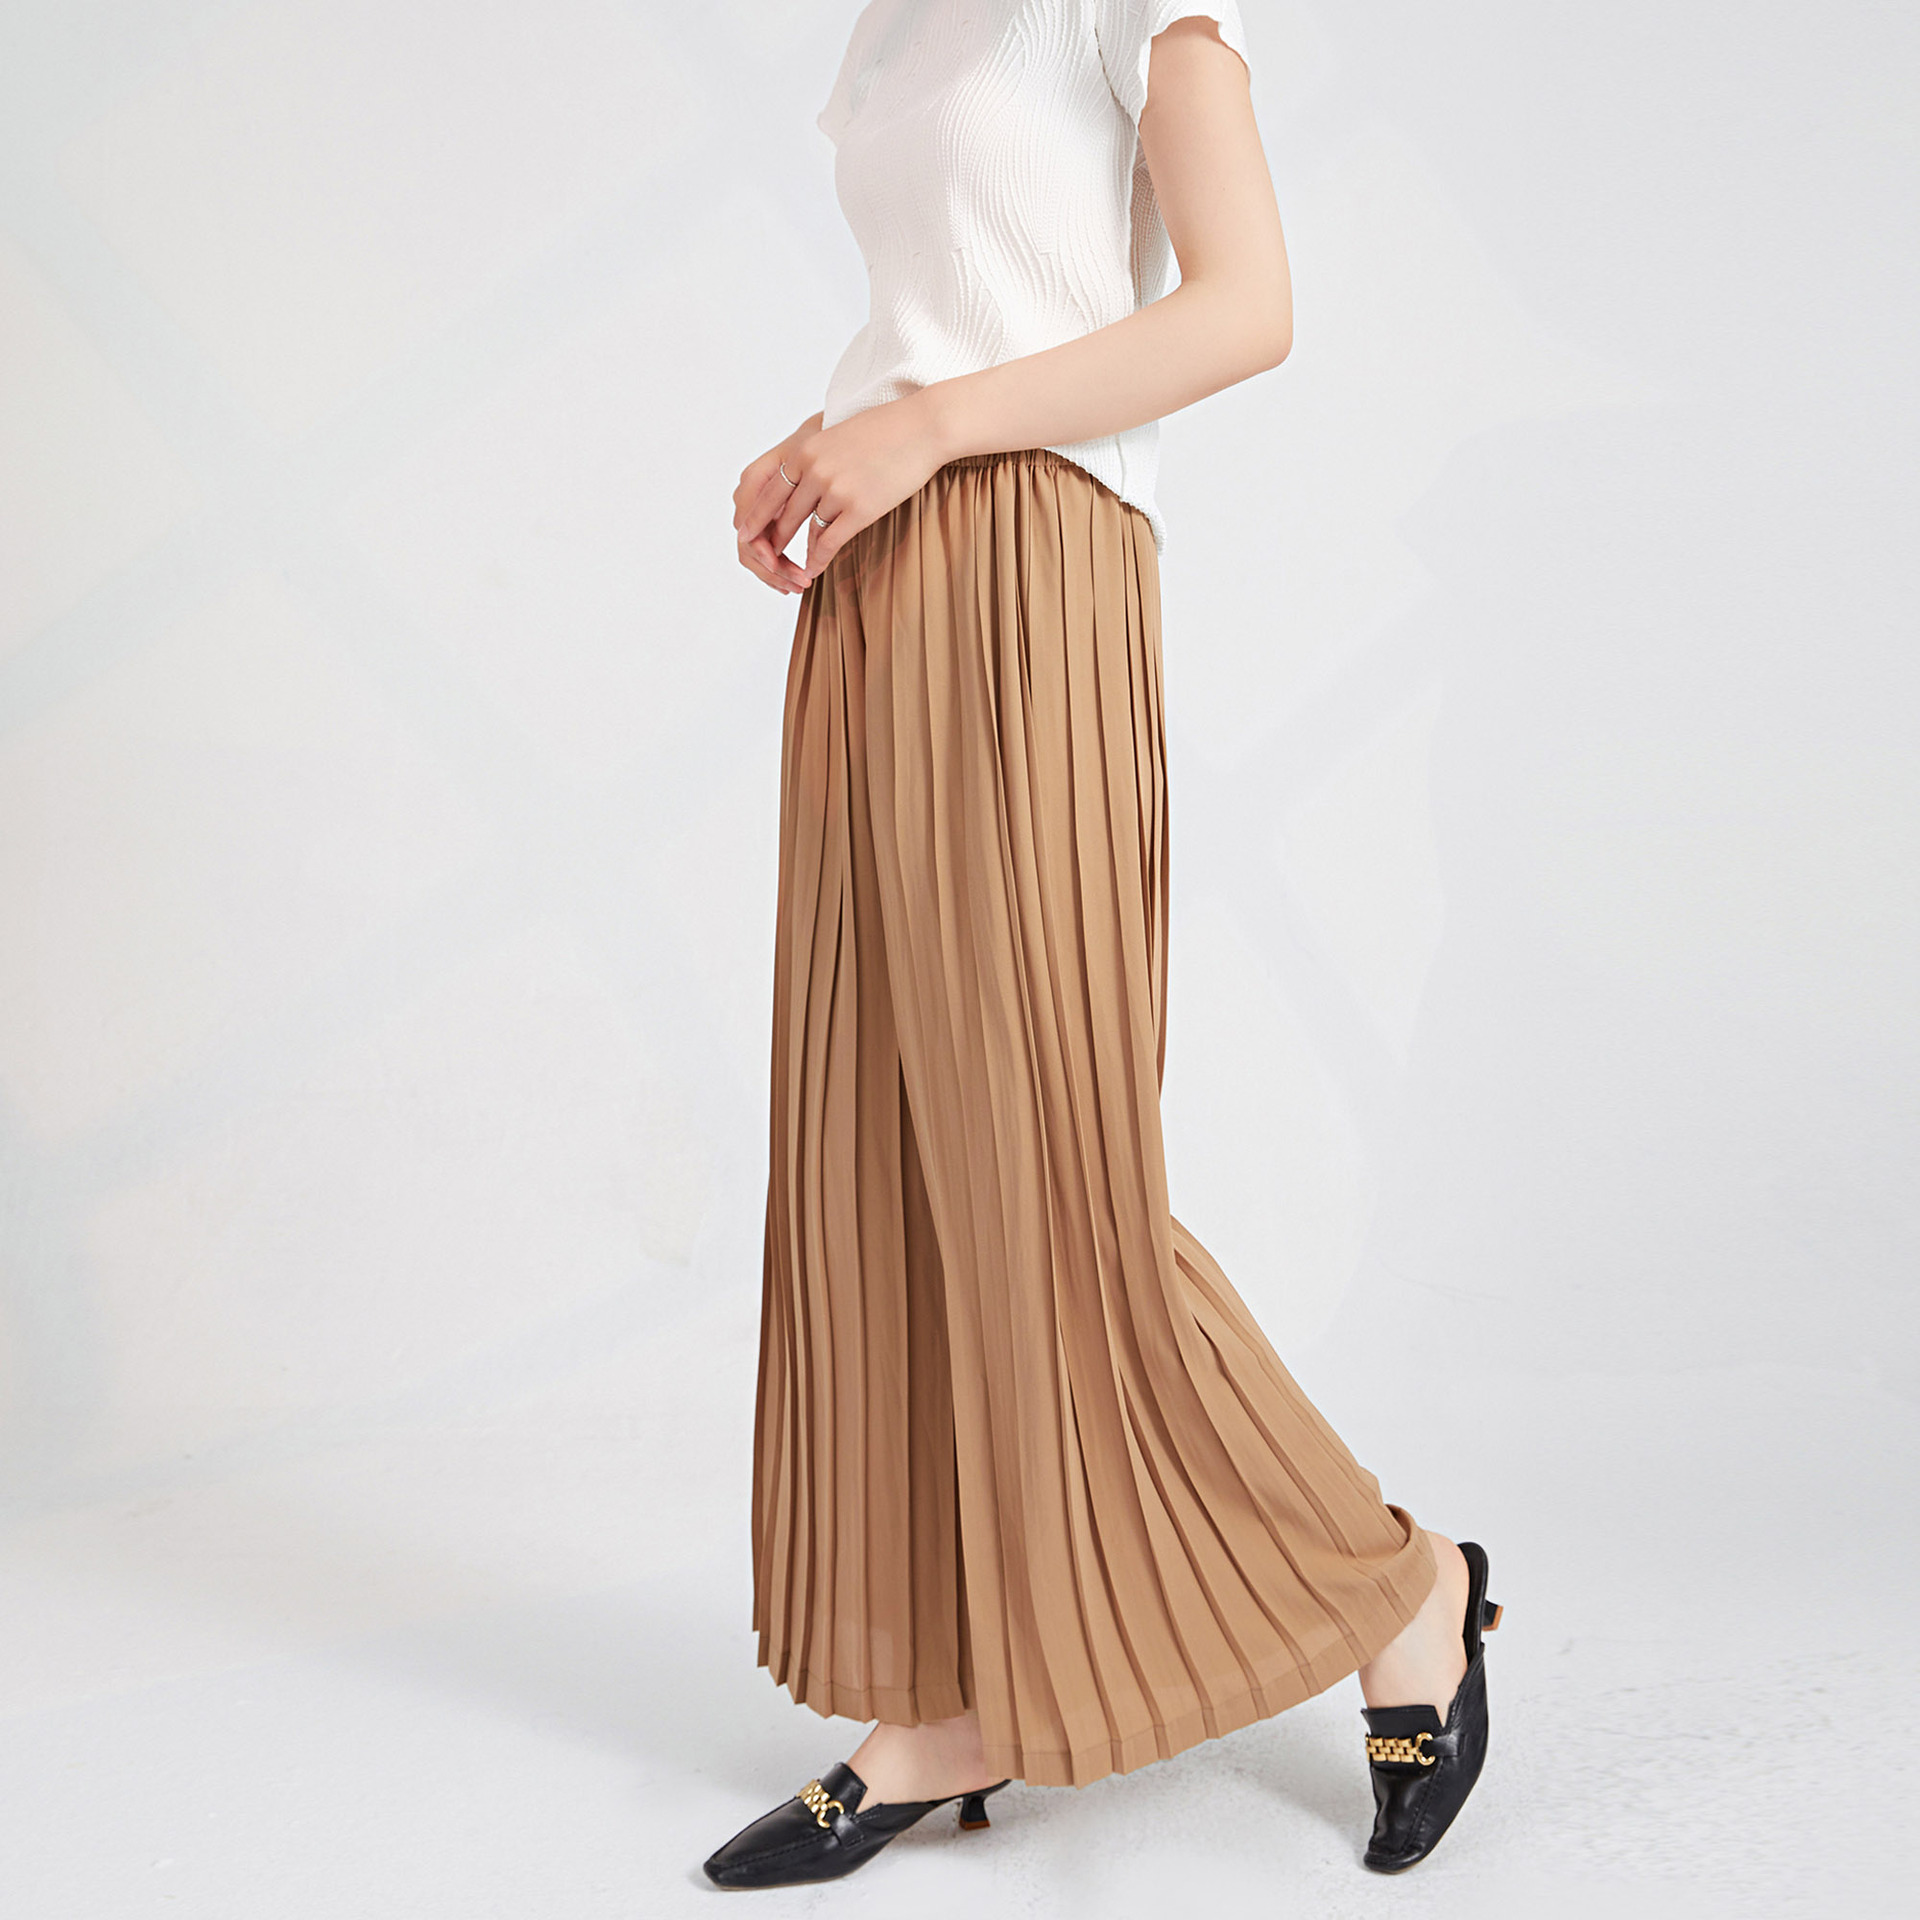 Comfortable Fits Meet High Fashion lady's fashion Fashion Pants Sleek and polished trousers for a professional look